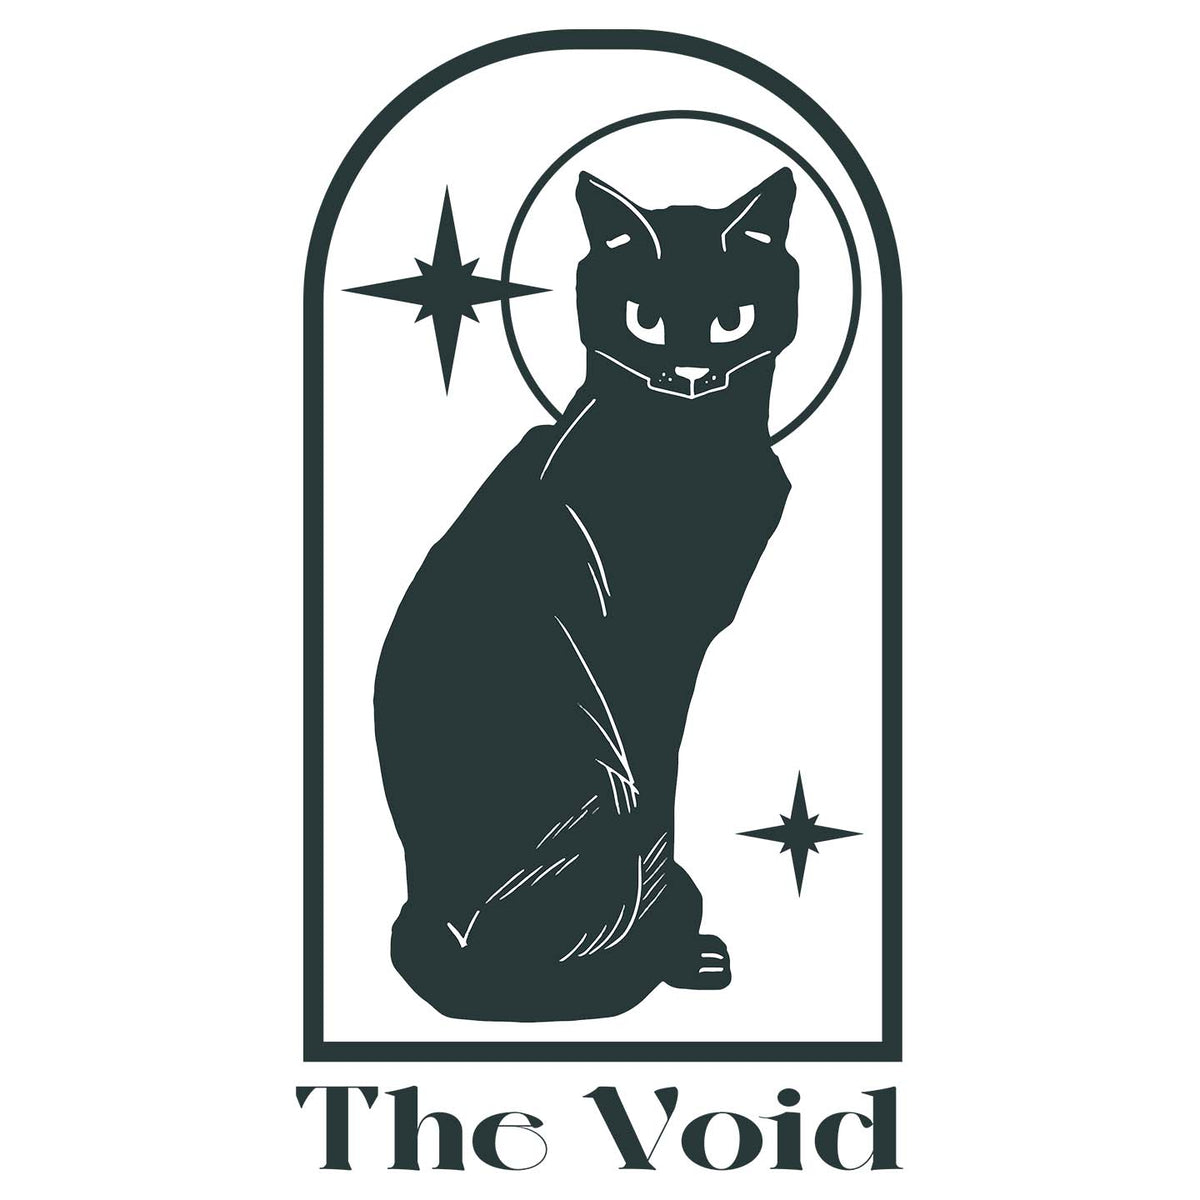 The Truth About “The Void” in a Deer's Chest